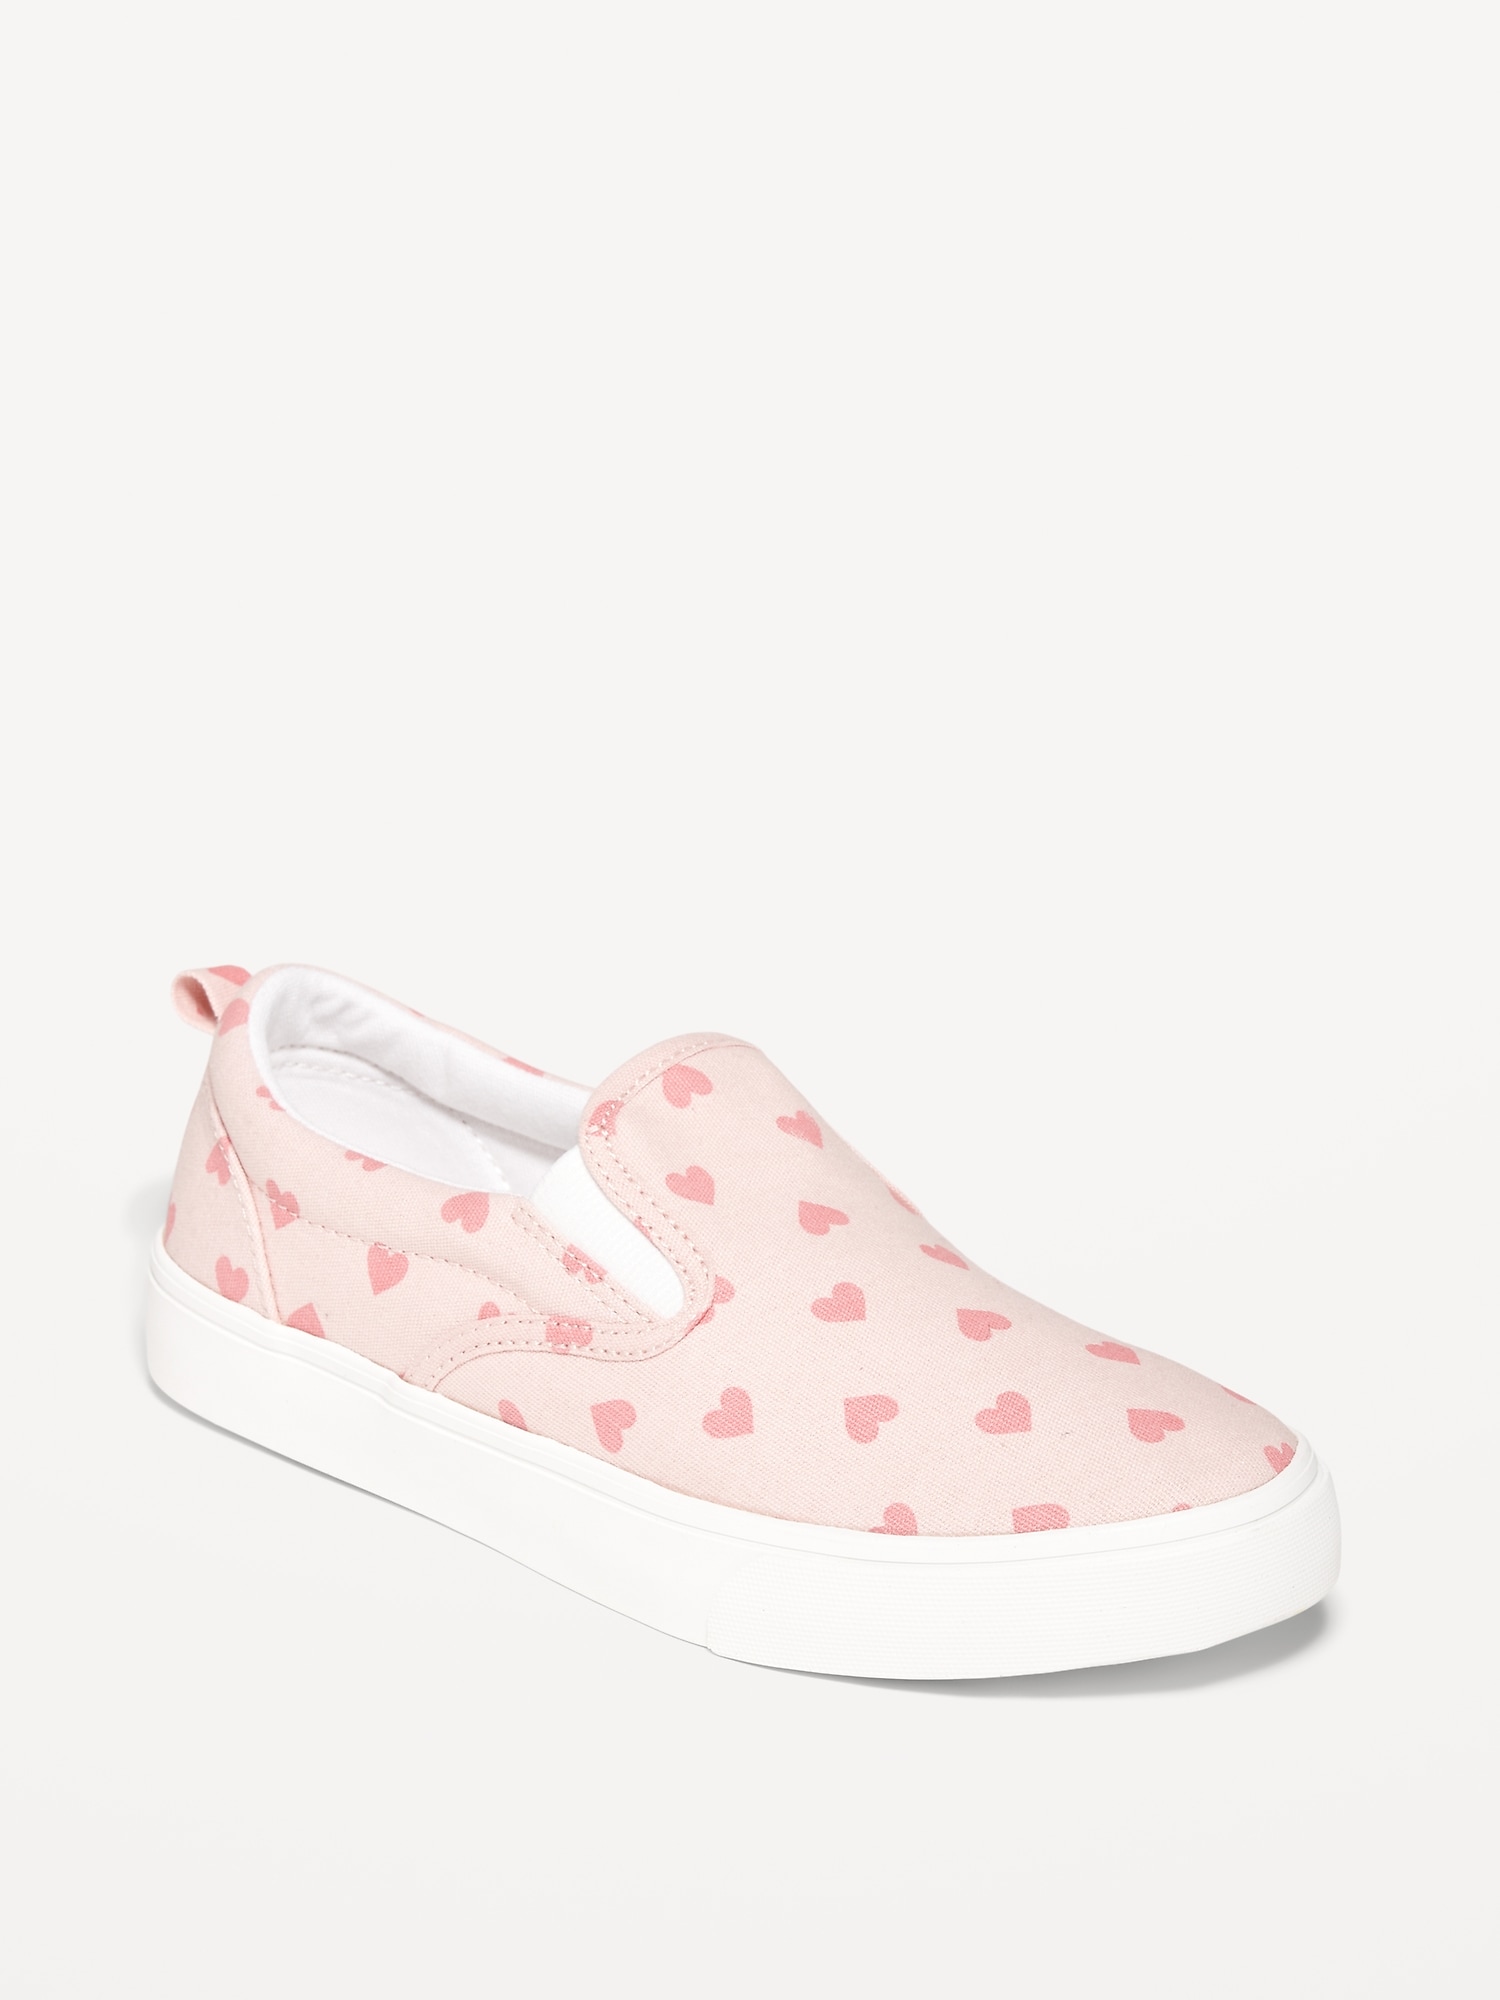 Old Navy Printed Canvas Slip-On Sneakers for Girls pink. 1